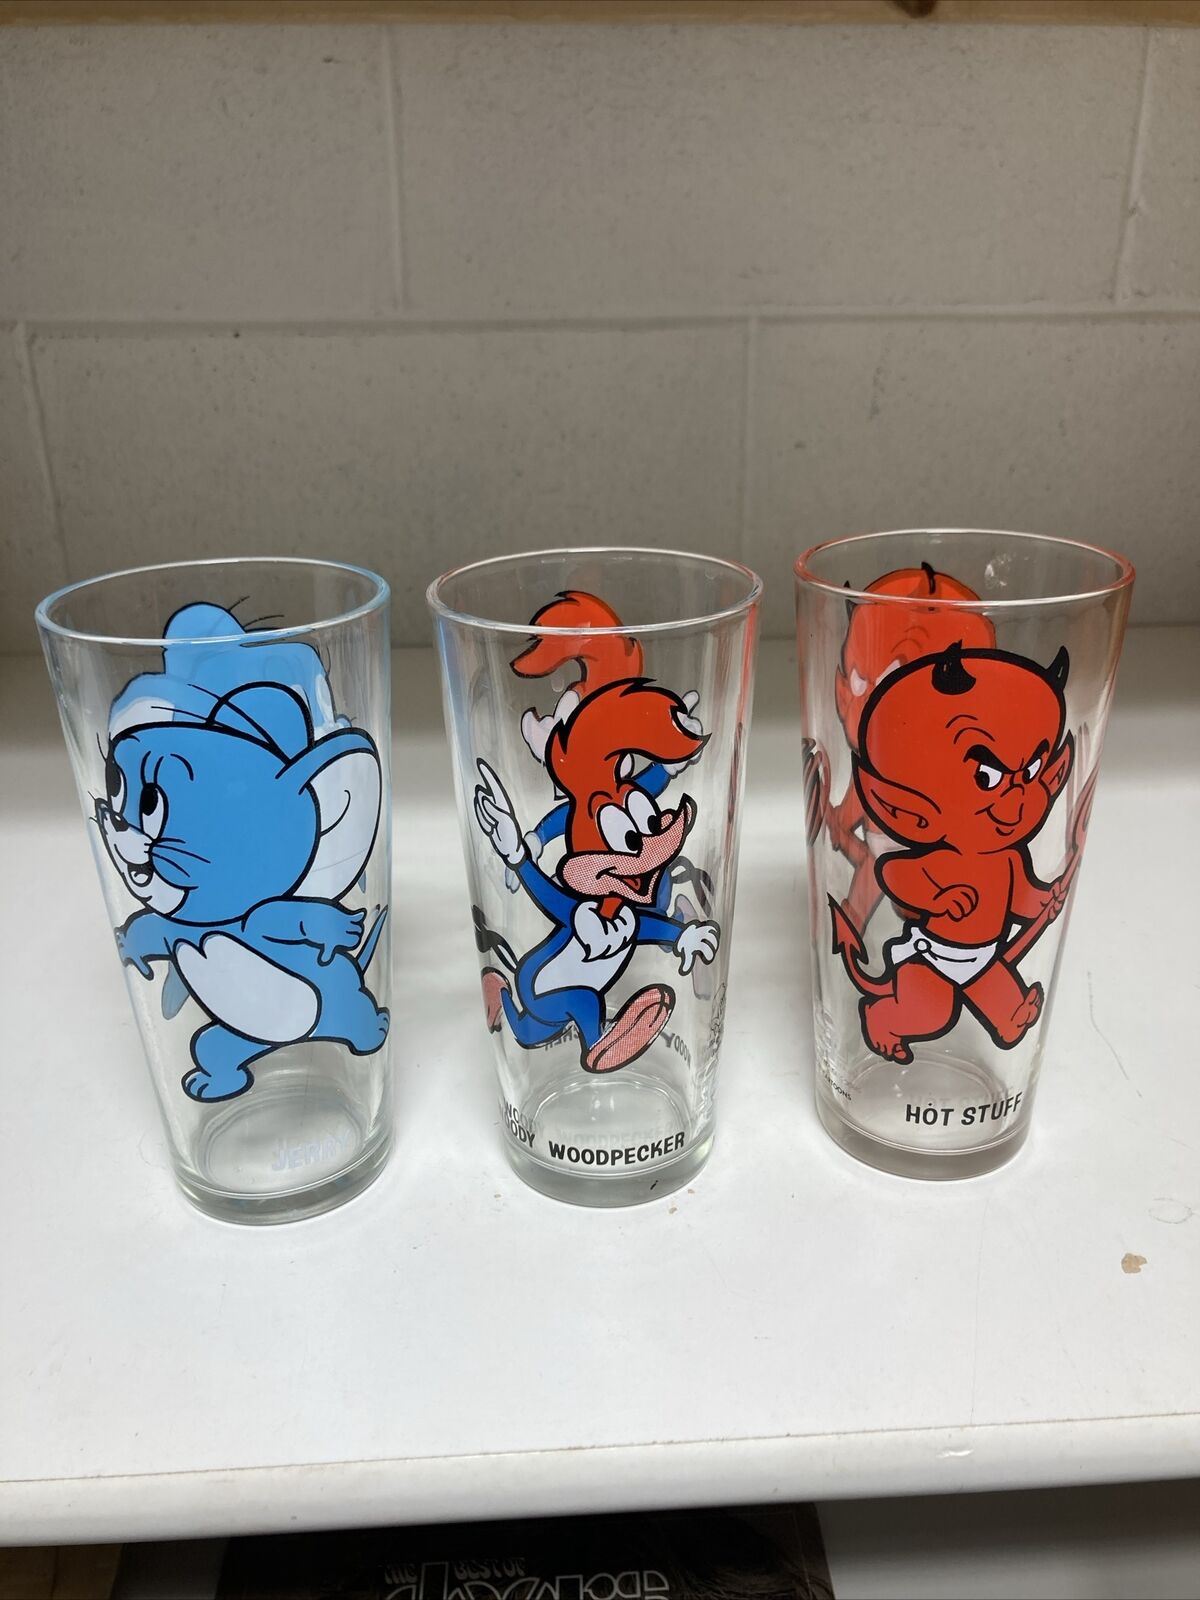 VTG Lot Of 3 1973 Pepsi Collectors Drinking Glasses: Hot Stuff, Jerry & Woody